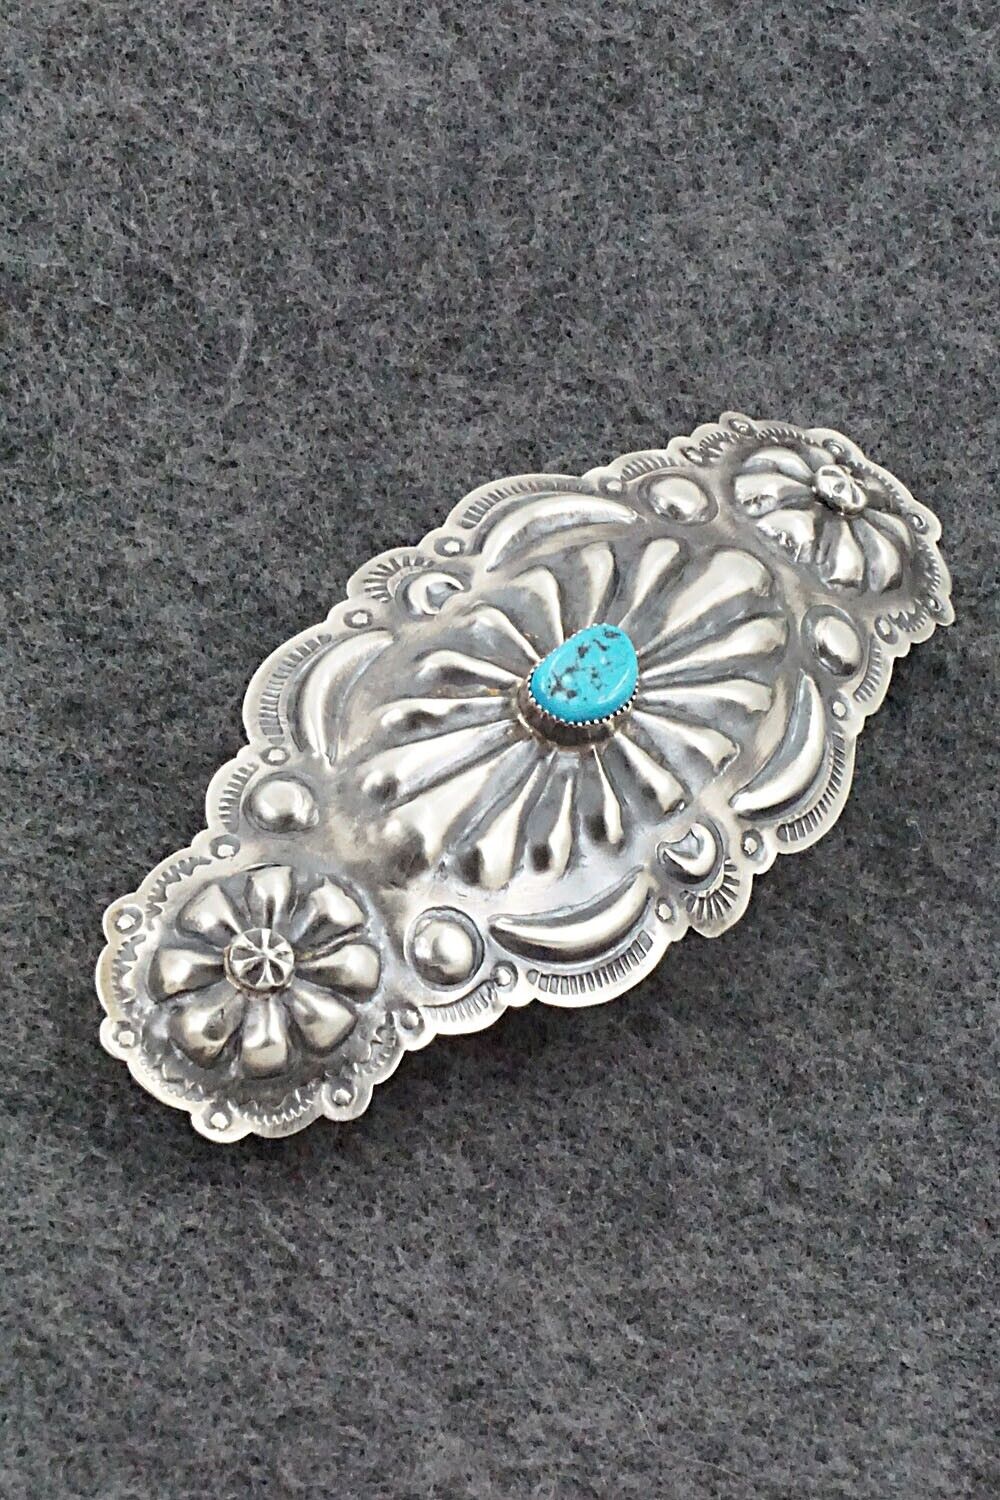 Turquoise & Sterling Silver Hair Barrette - Tim Yazzie